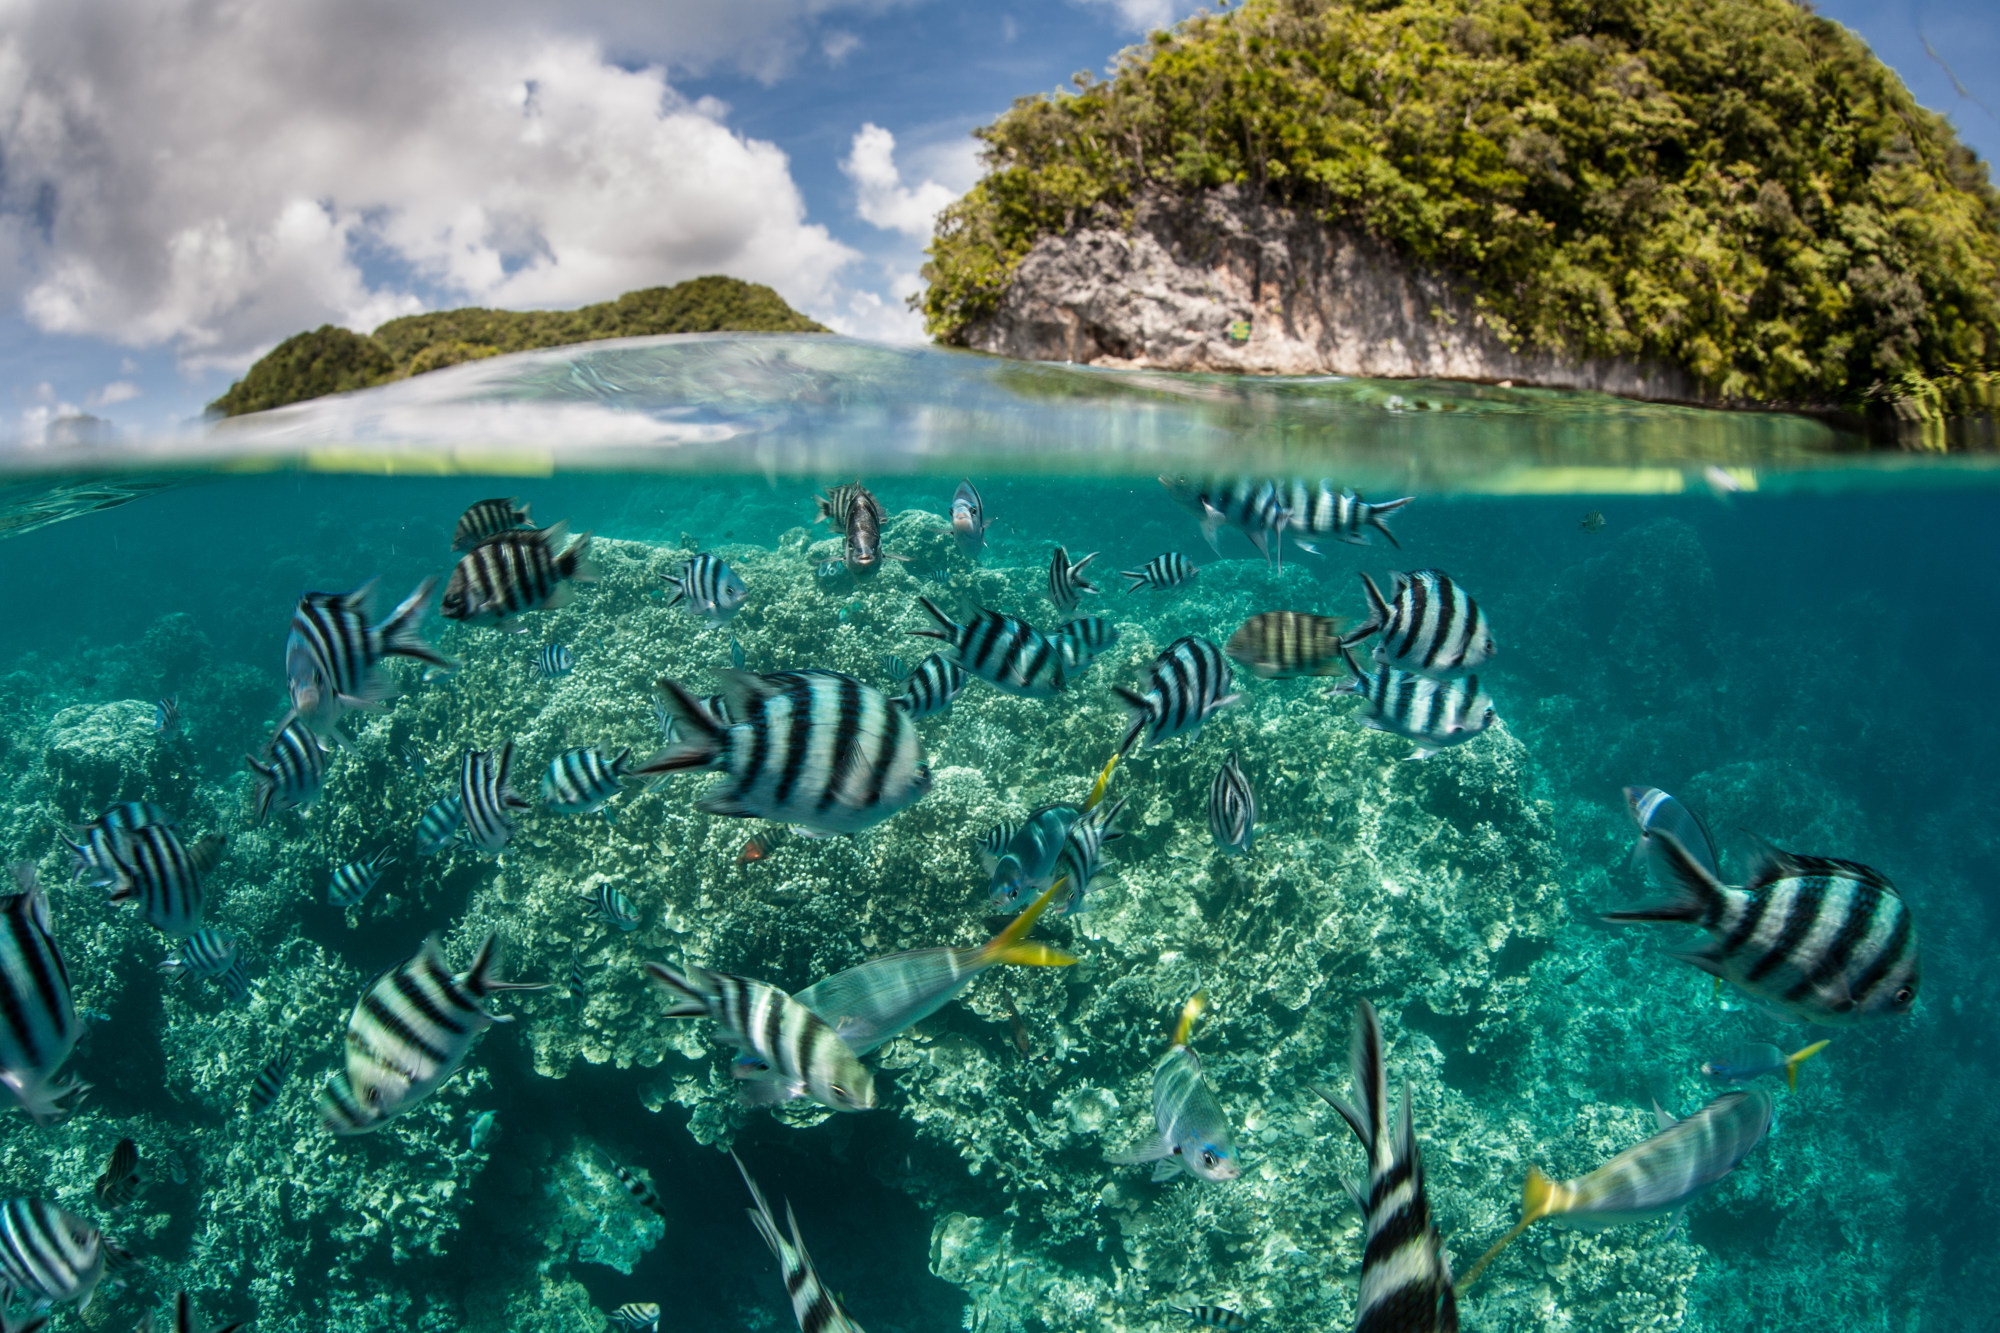 Damselfish swim in Palau’s inner lagoon. Known for its extensive ocean life, Palau in recent years has struggled economically from a lack of Chinese tourists and the impact of the coronavirus pandemic. Photo: Shutterstock